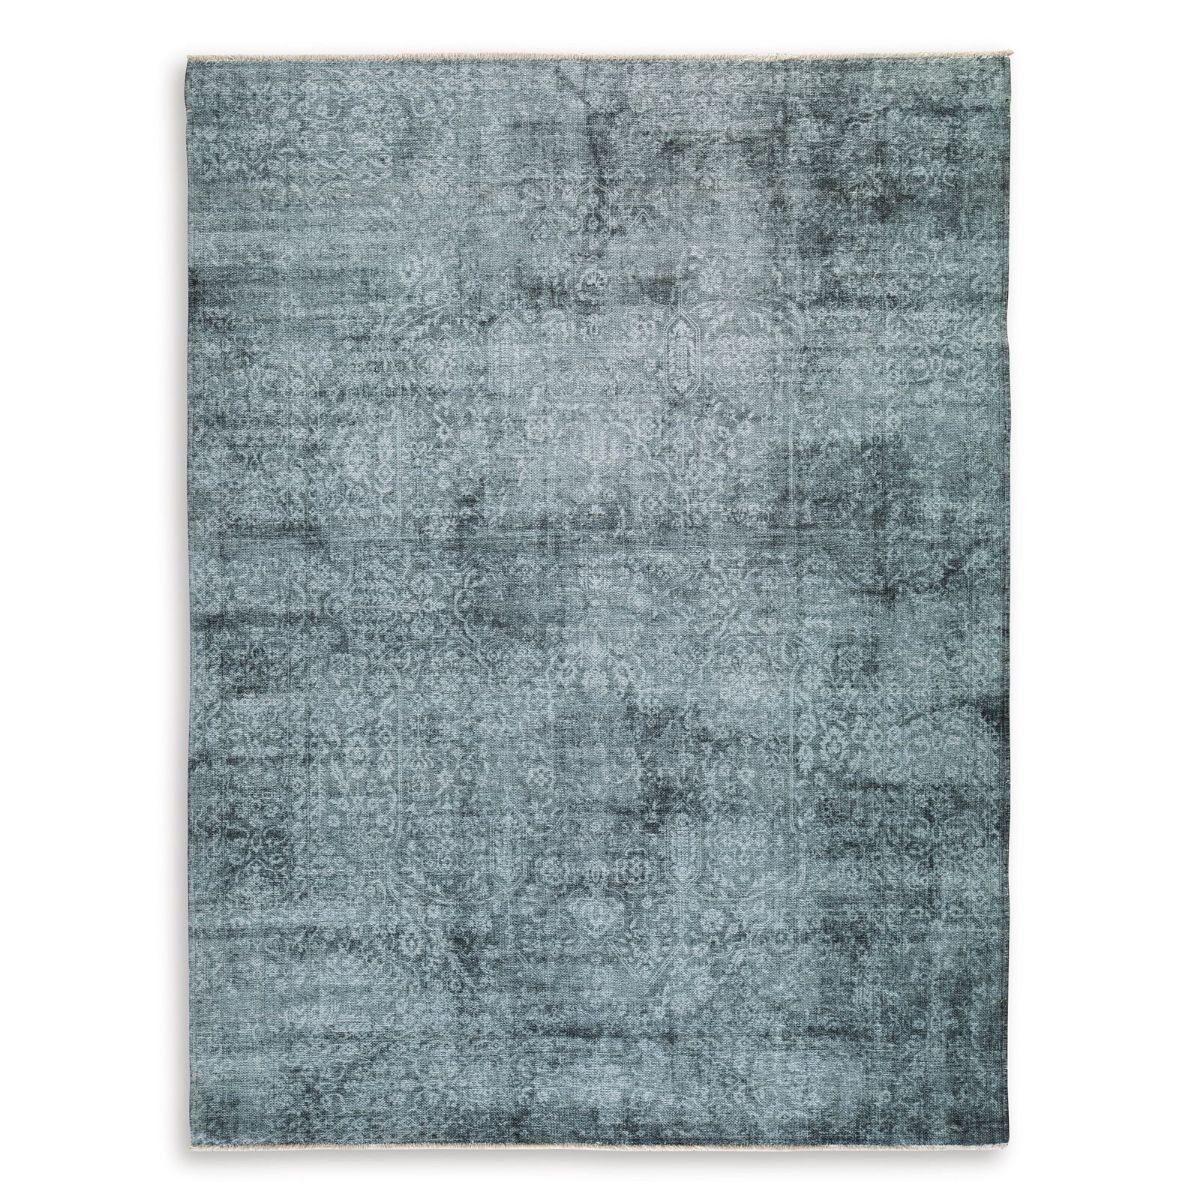 Picture of Rhysill Teal 5’ x 7’ Rug